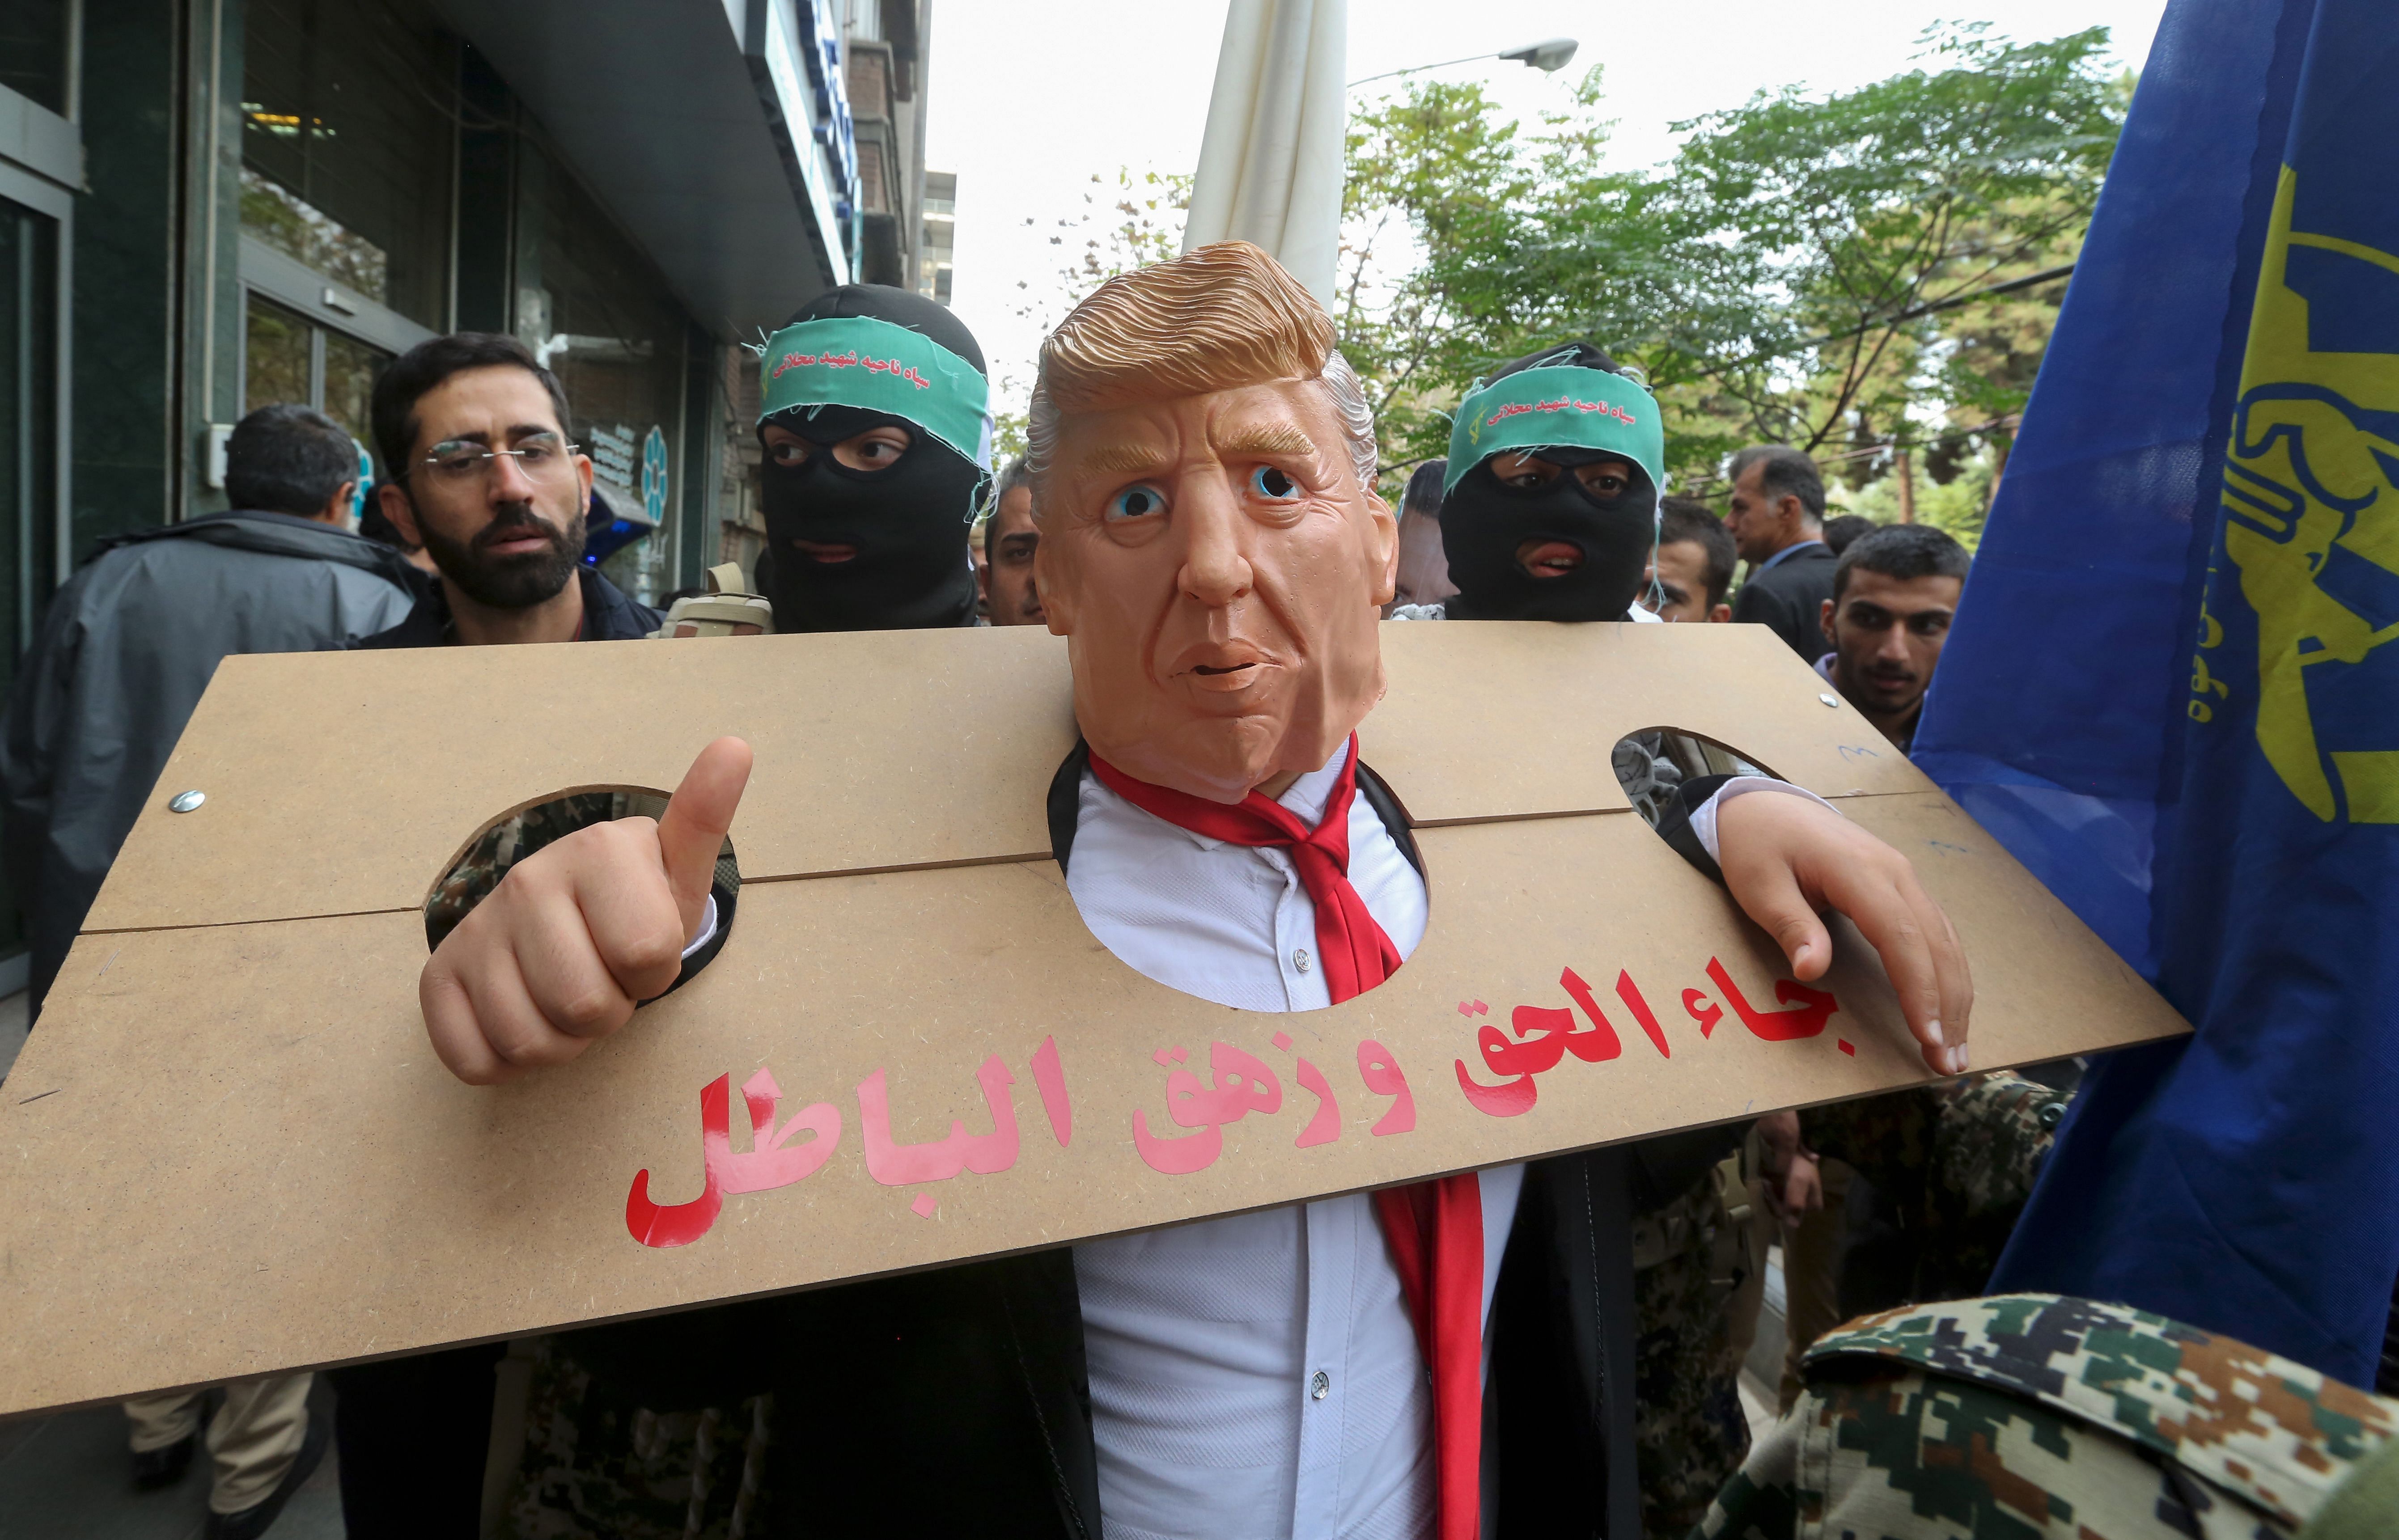 An Iranian protester dressed as US president Donald Trump in a pillory takes part in a rally outside the former US embassy in the capital Tehran. (AFP Photo)